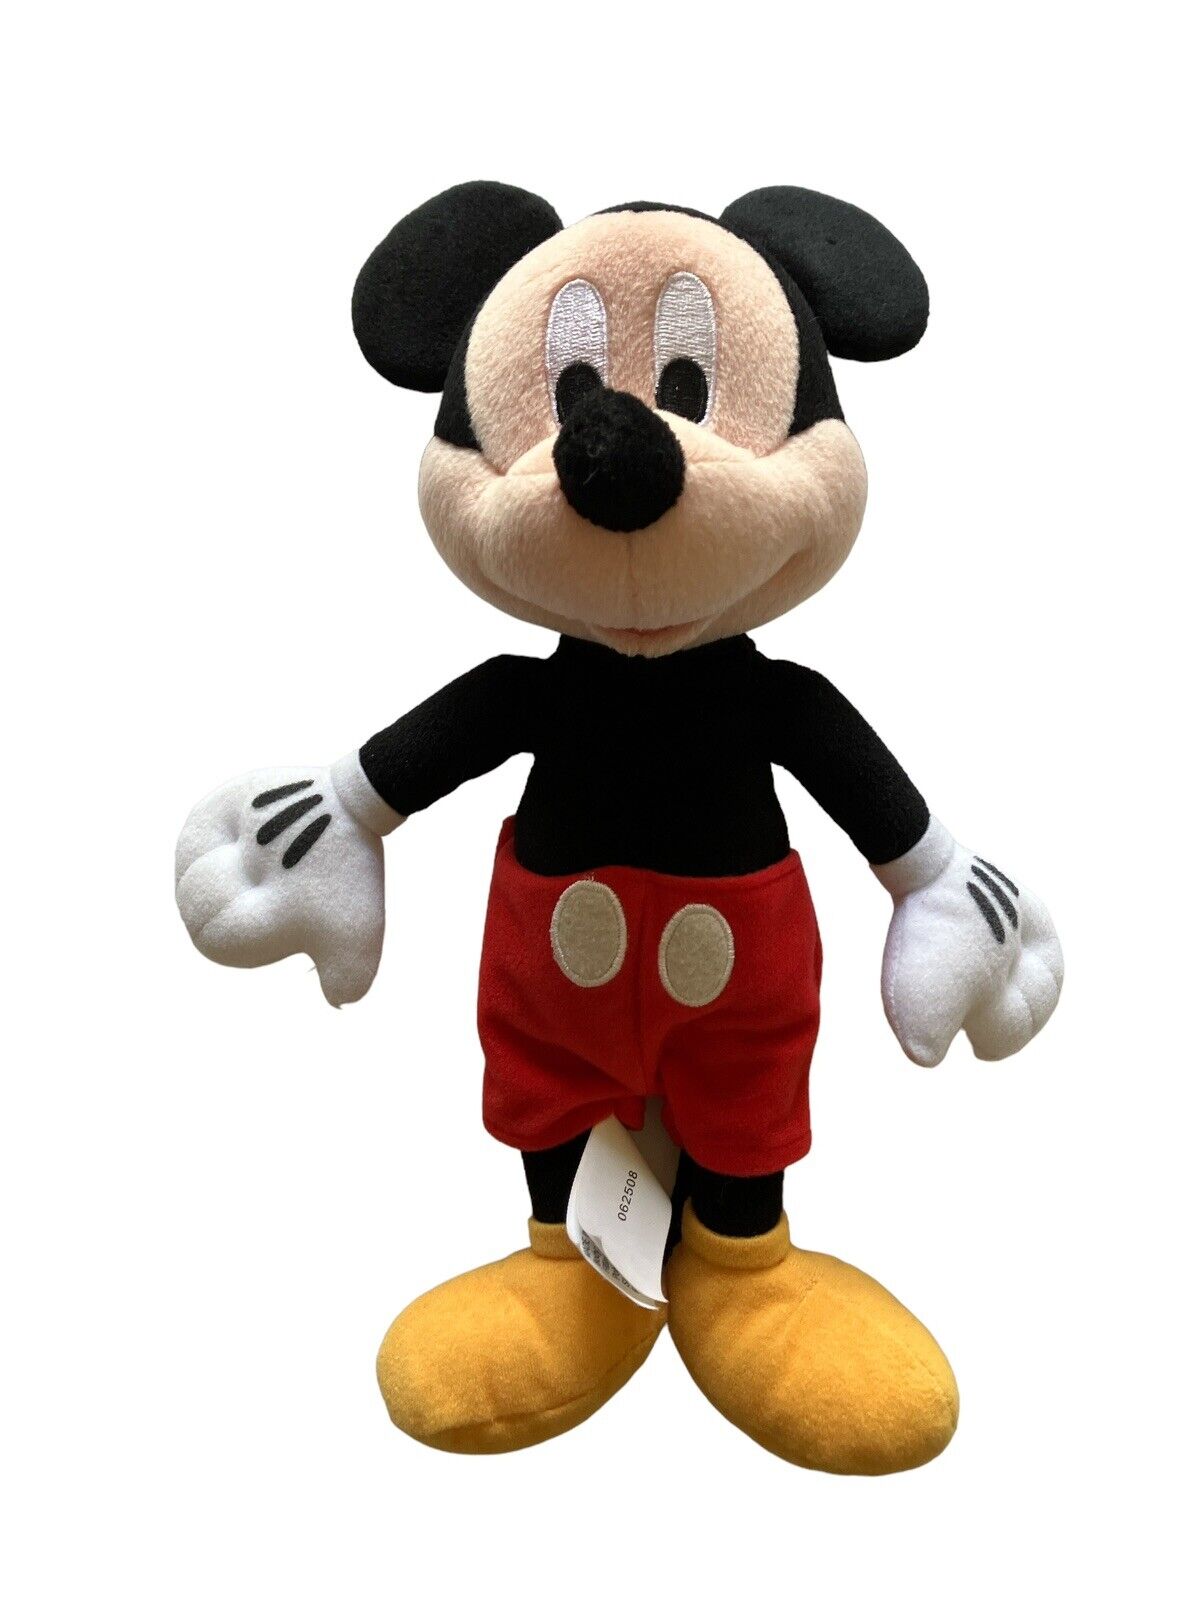 Mickey Plush Disney Store Authentic Stuffed Doll Toy  (10inch)